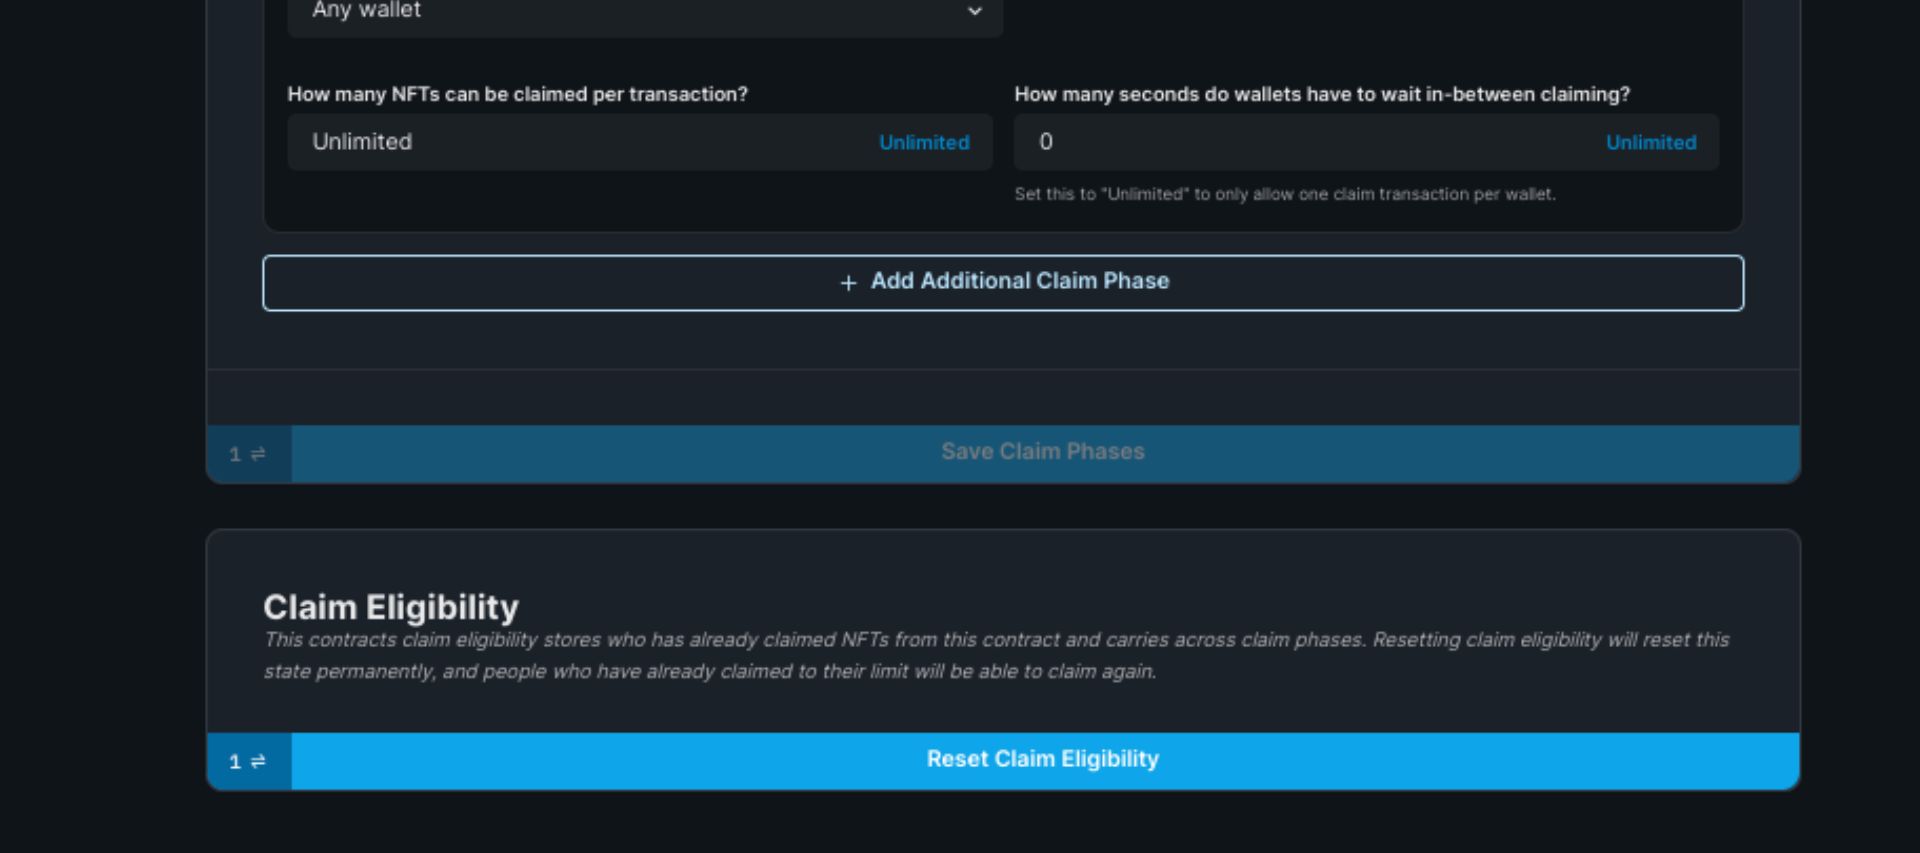 You can set additional phases for your nft mint too if you want. This is useful if you want to launch your nft collection in phases.